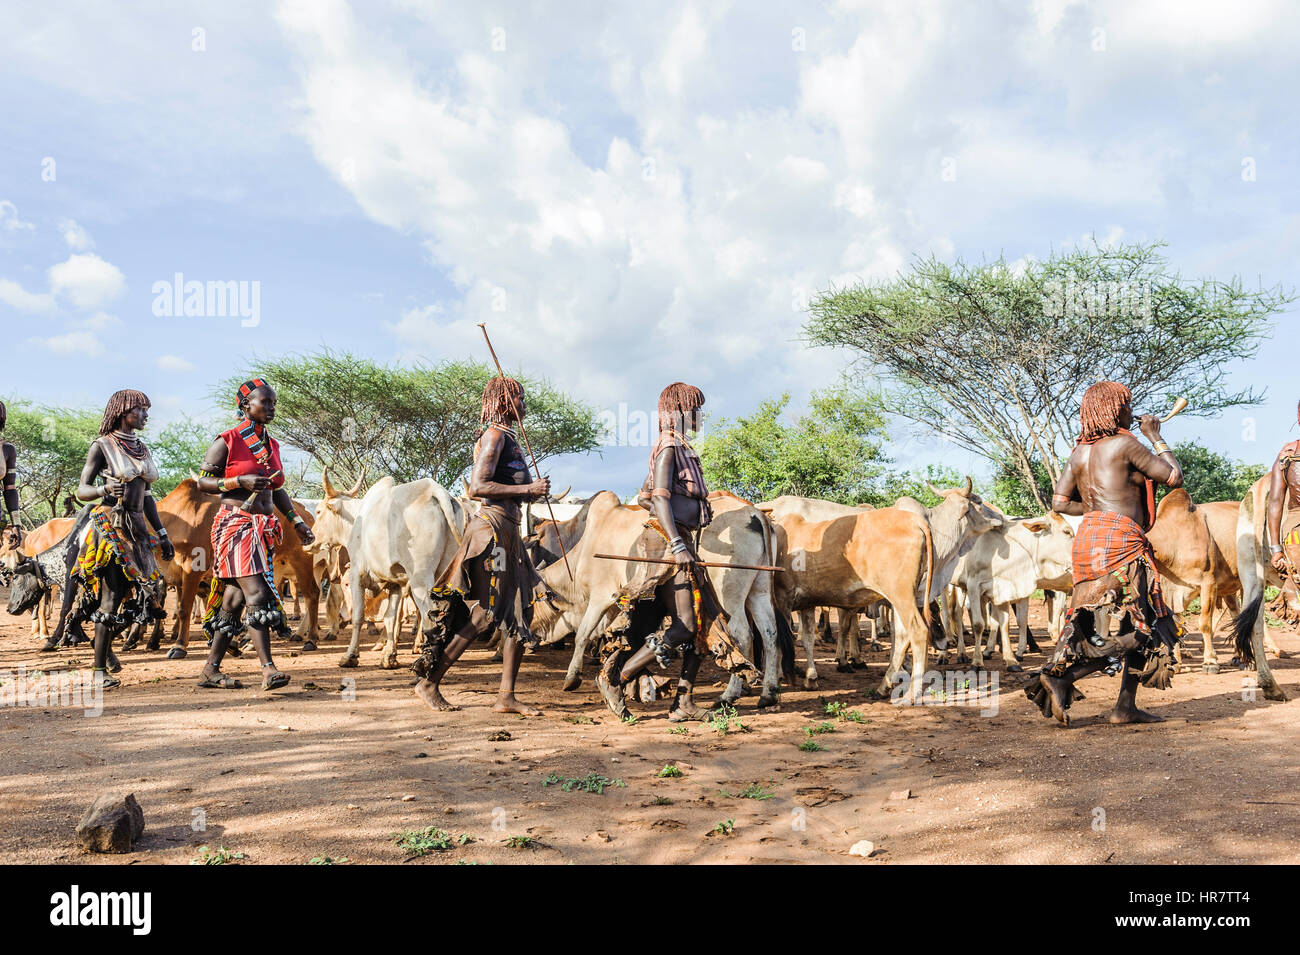 Women dancing around the cattle during a bull jumping ceremony. A rite of passage from boys to men rom the Hamer tribe. Stock Photo